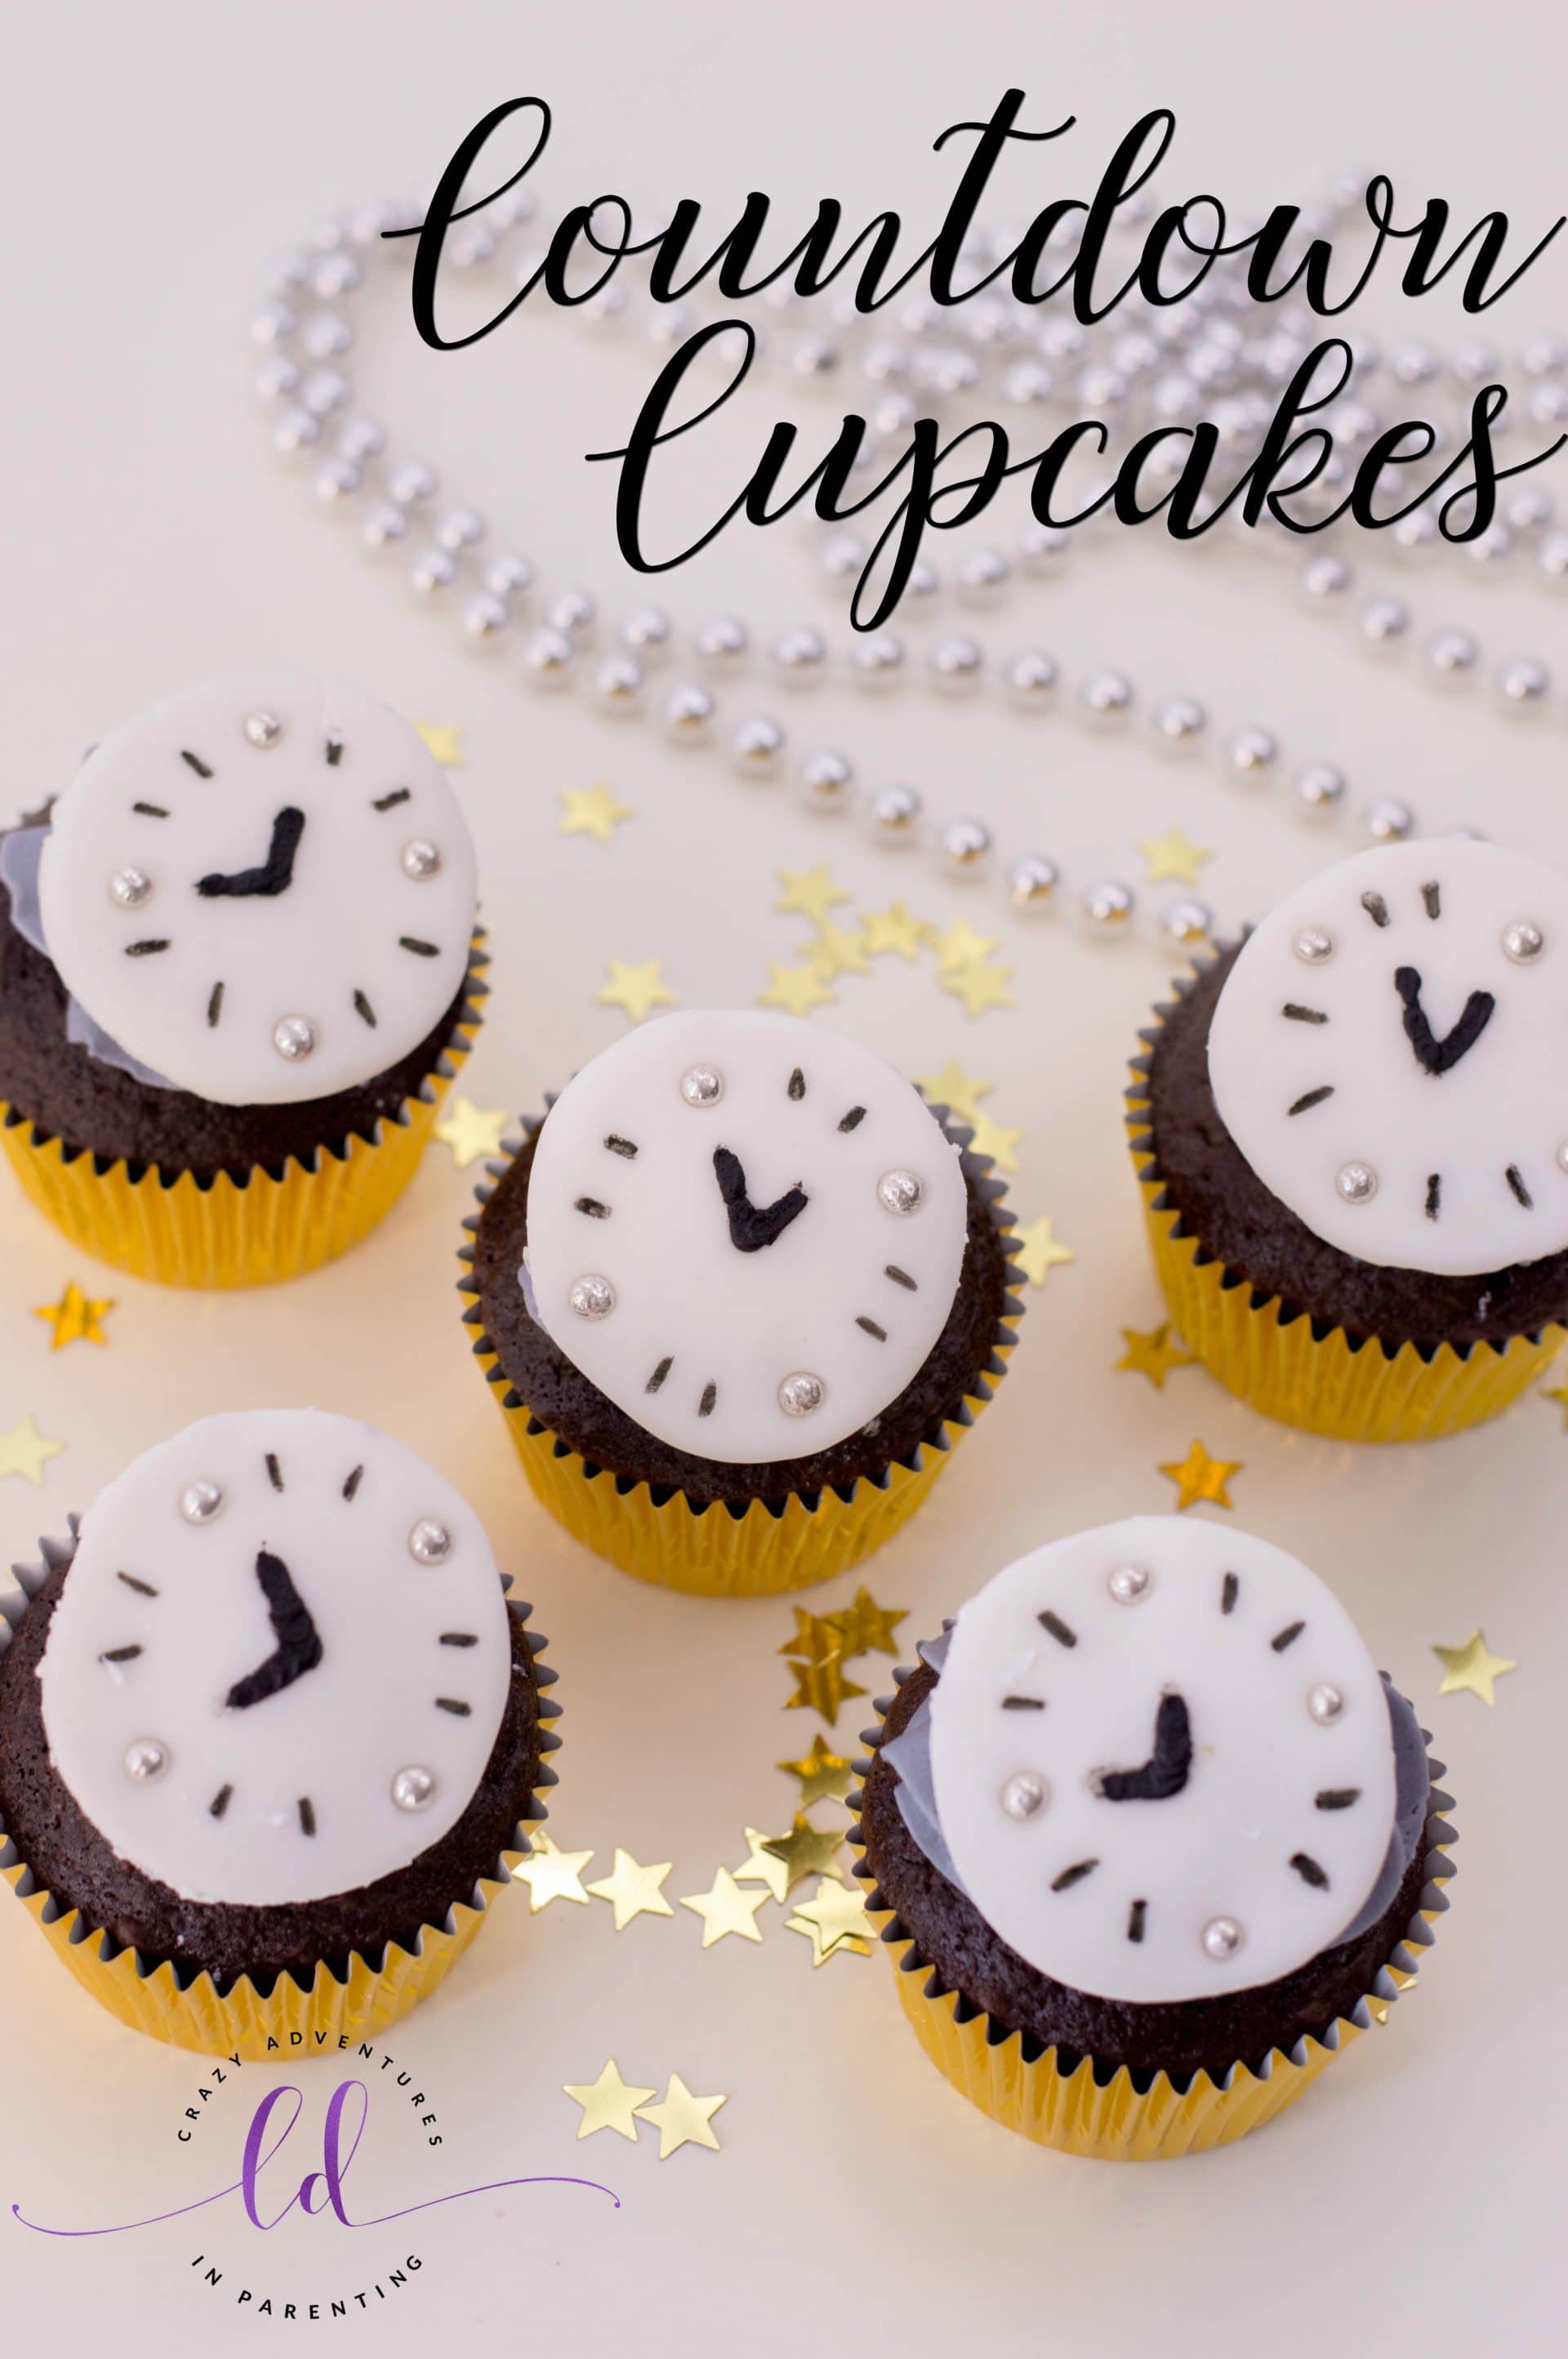 Countdown Cupcakes for New Year's